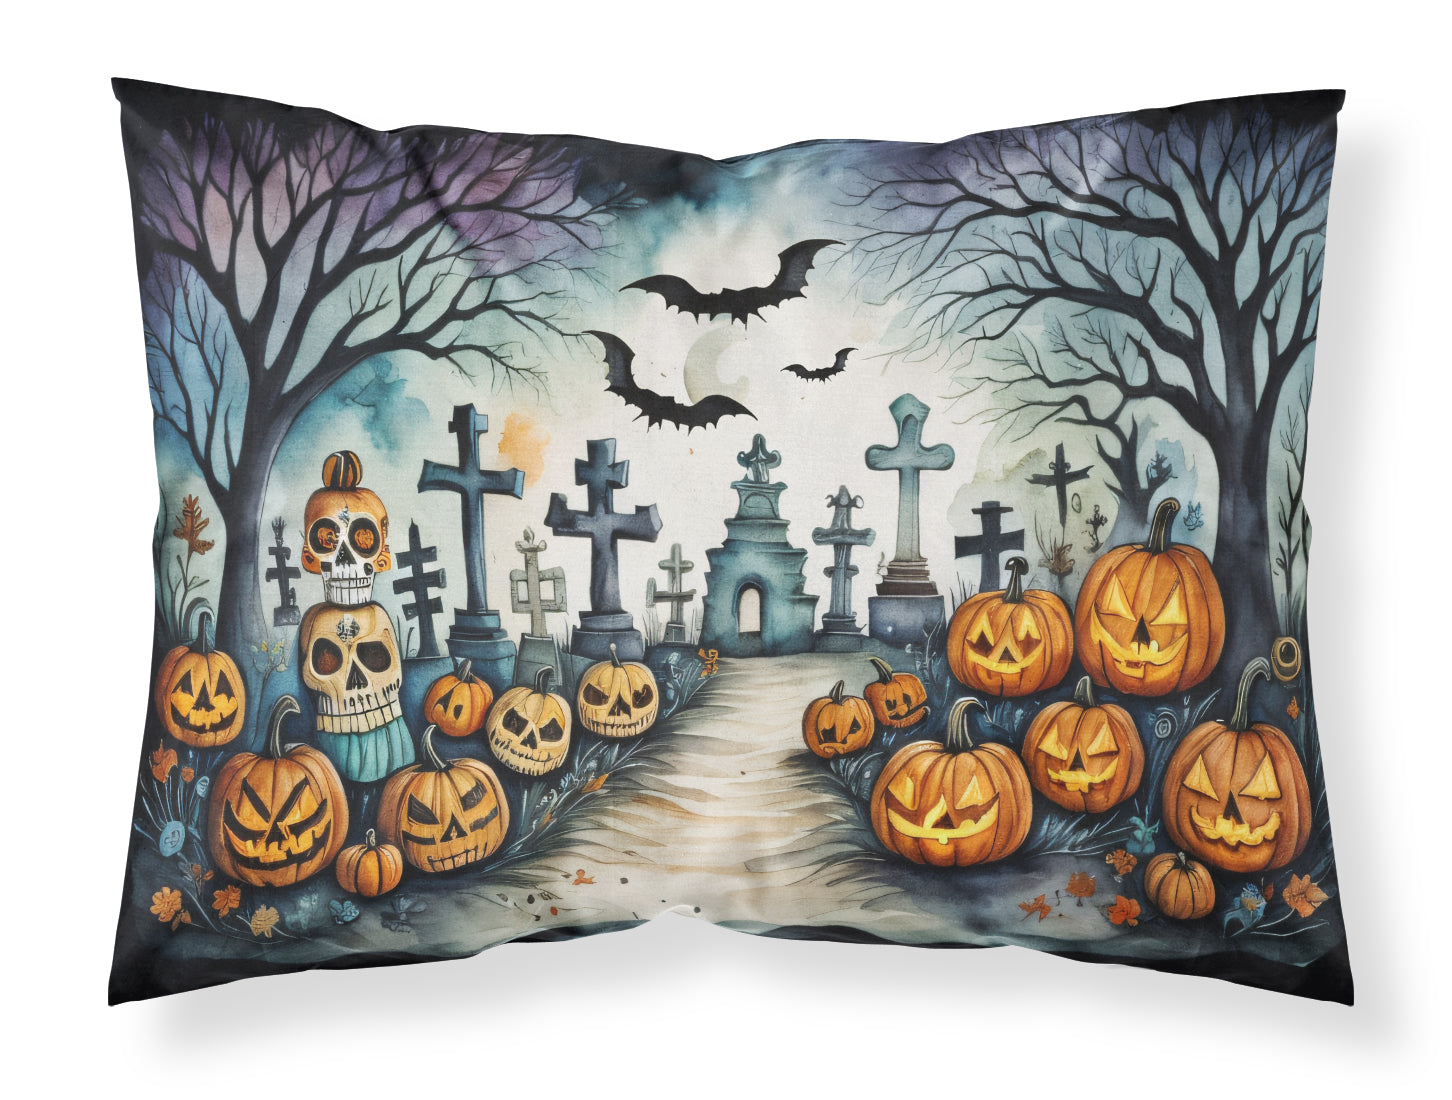 Buy this Day of the Dead Spooky Halloween Fabric Standard Pillowcase